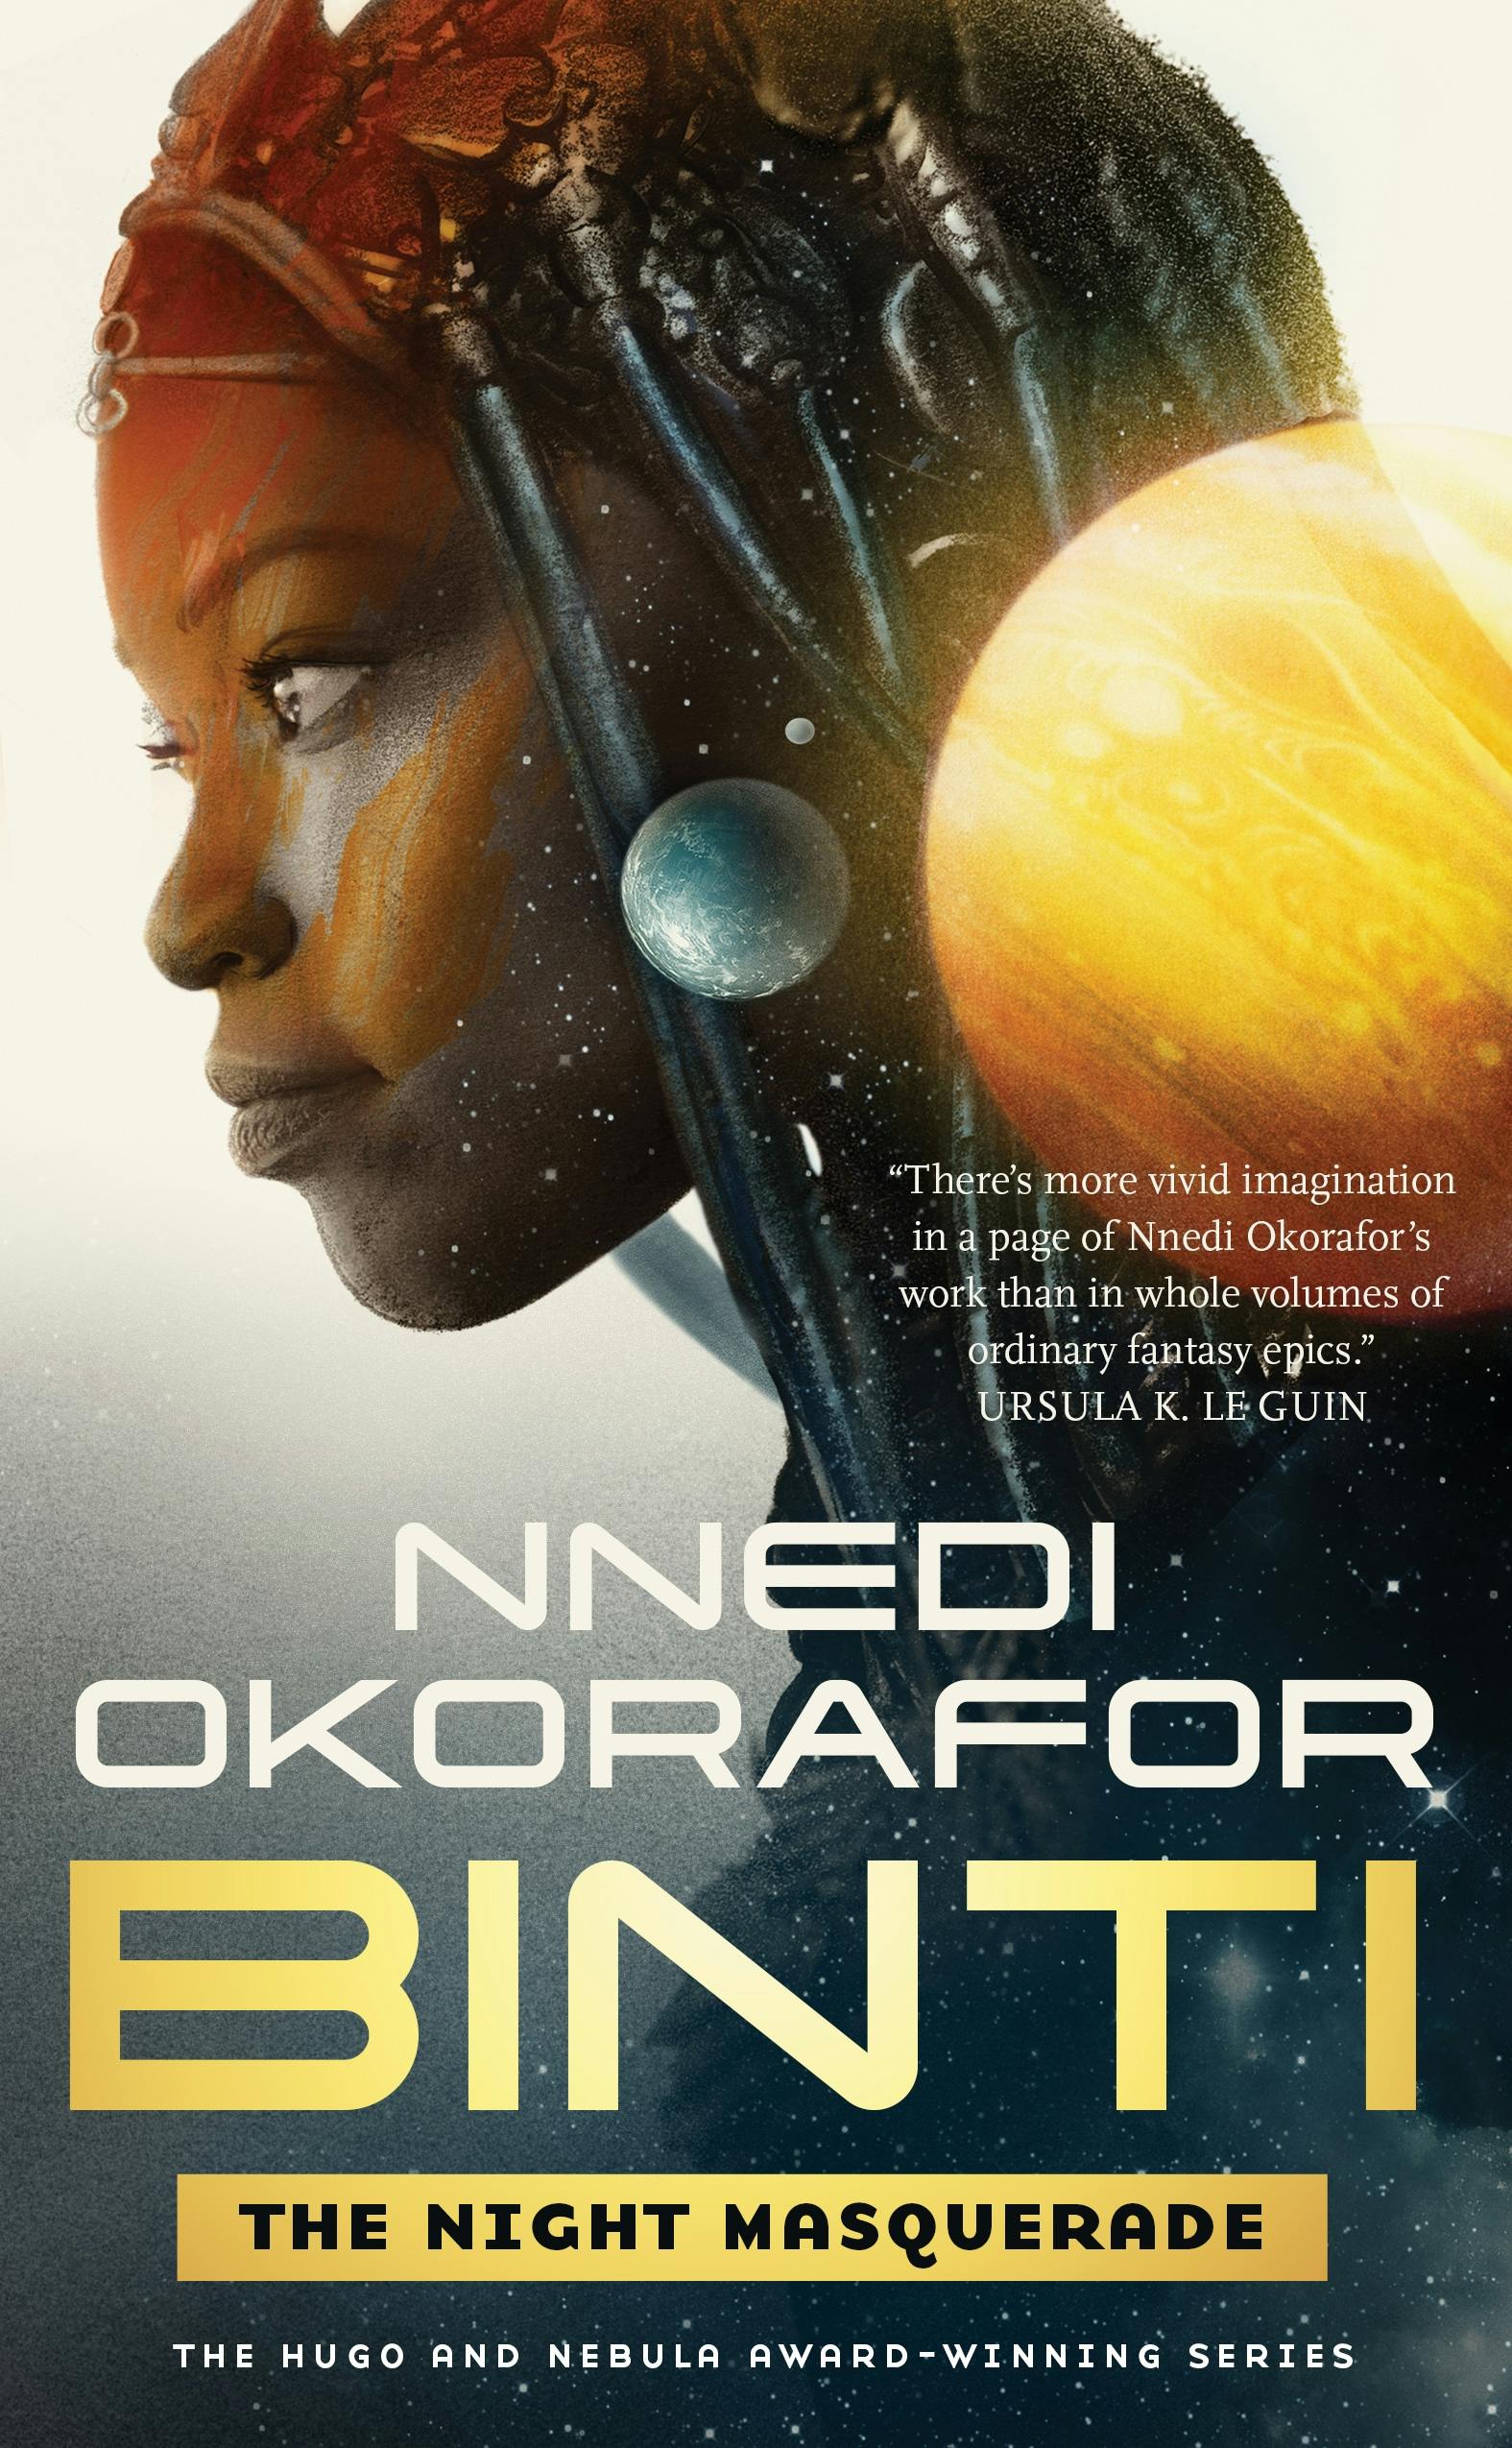 Cover for the book titled as: Binti: The Night Masquerade